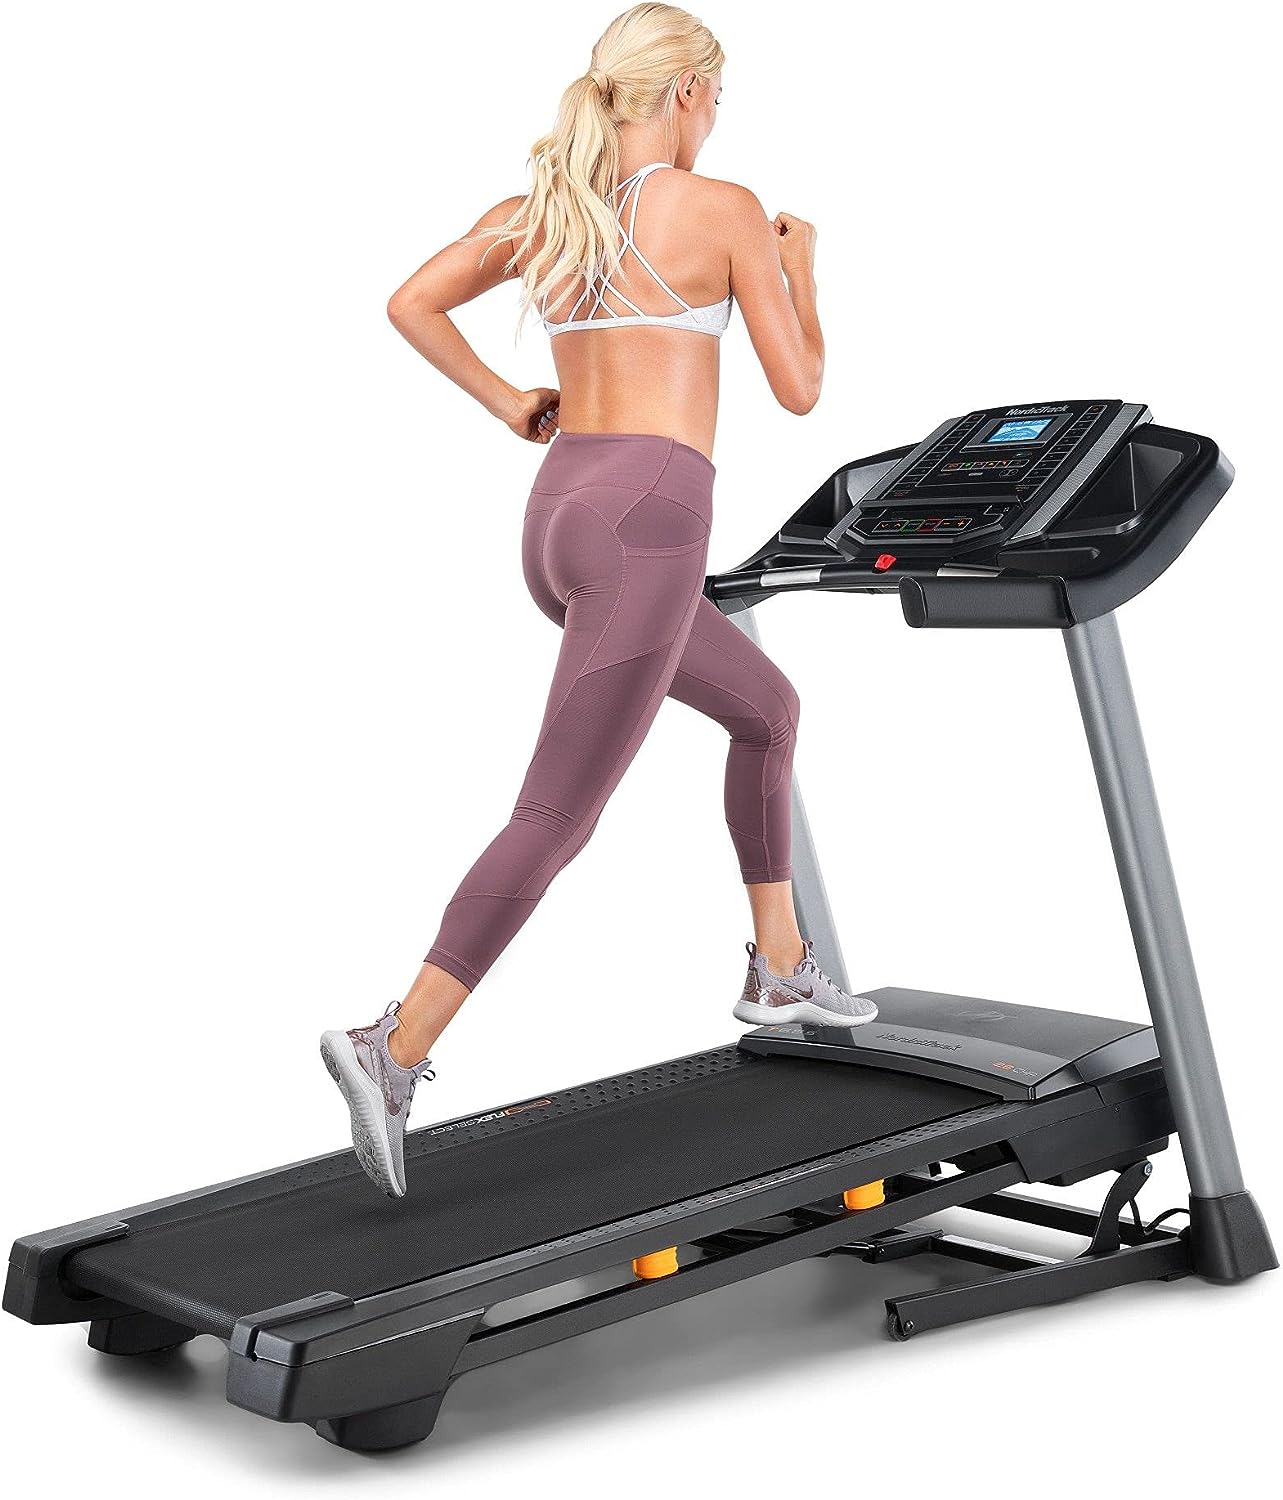 nordictrack t series foldable treadmill review